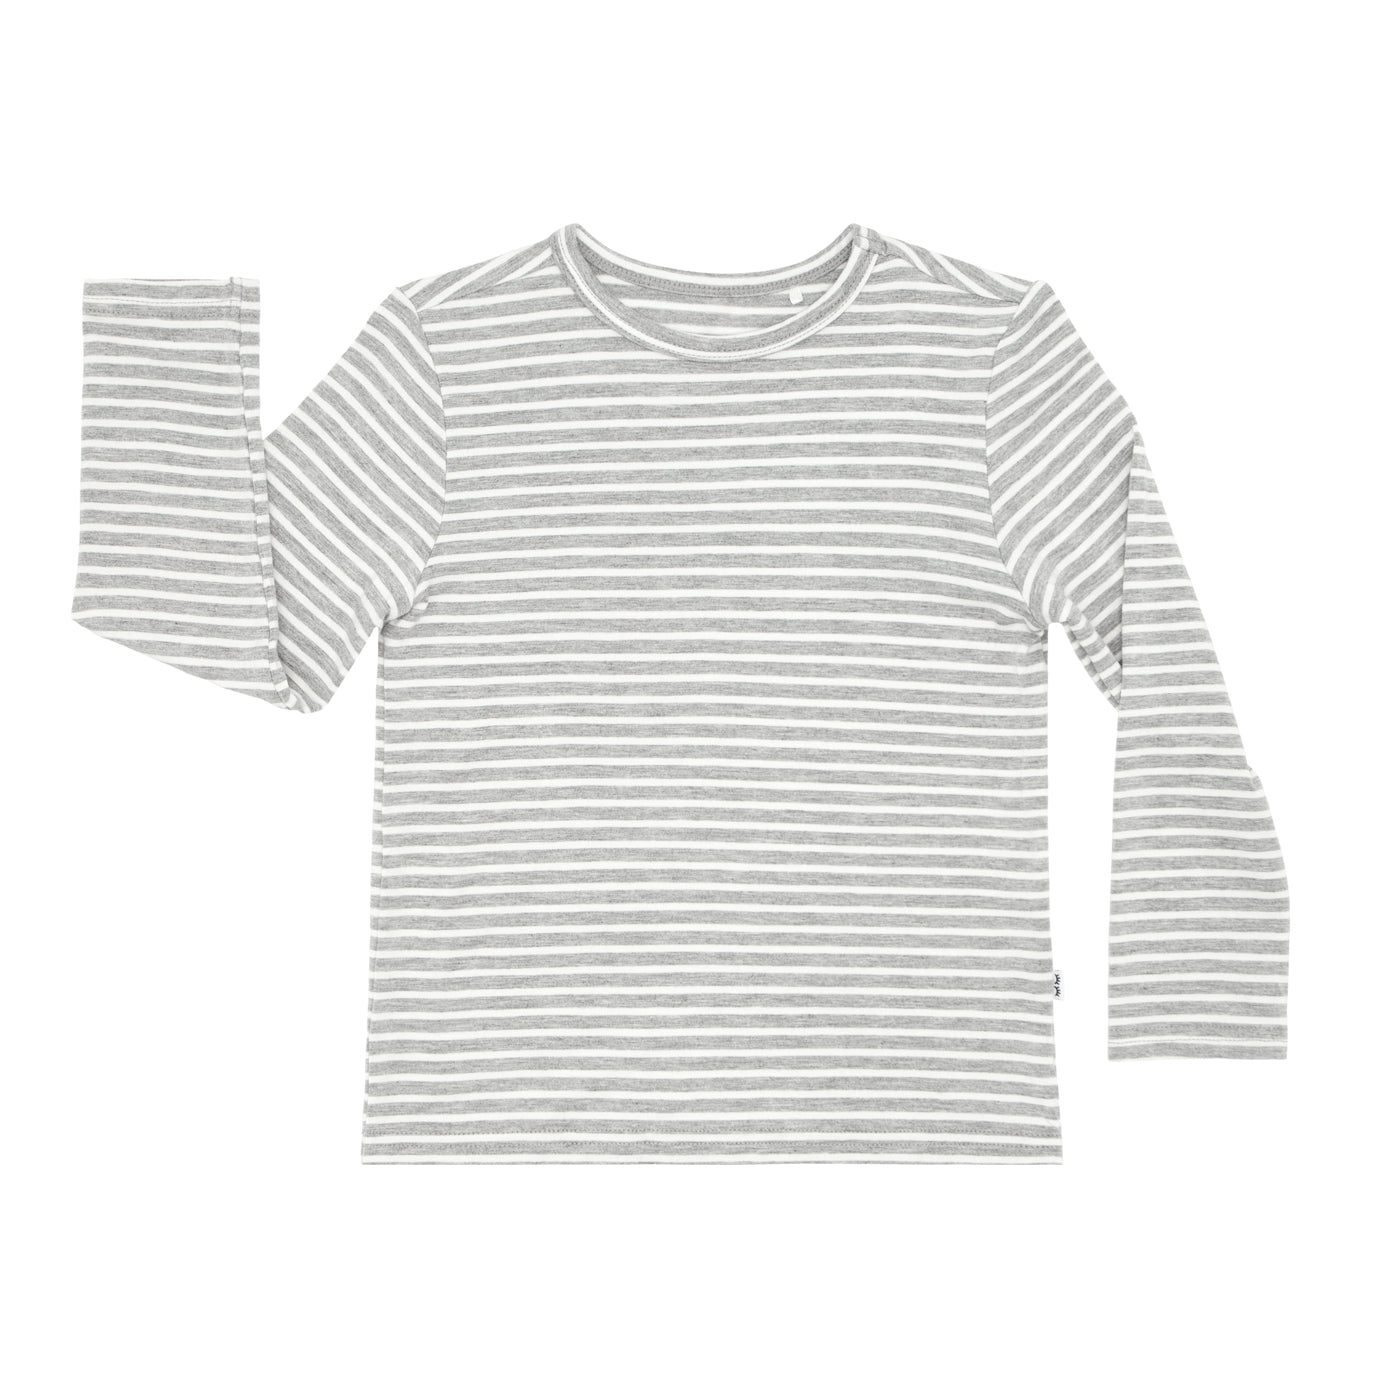 Flat lay image of a Heather Gray and Ivory Stripe classic tee